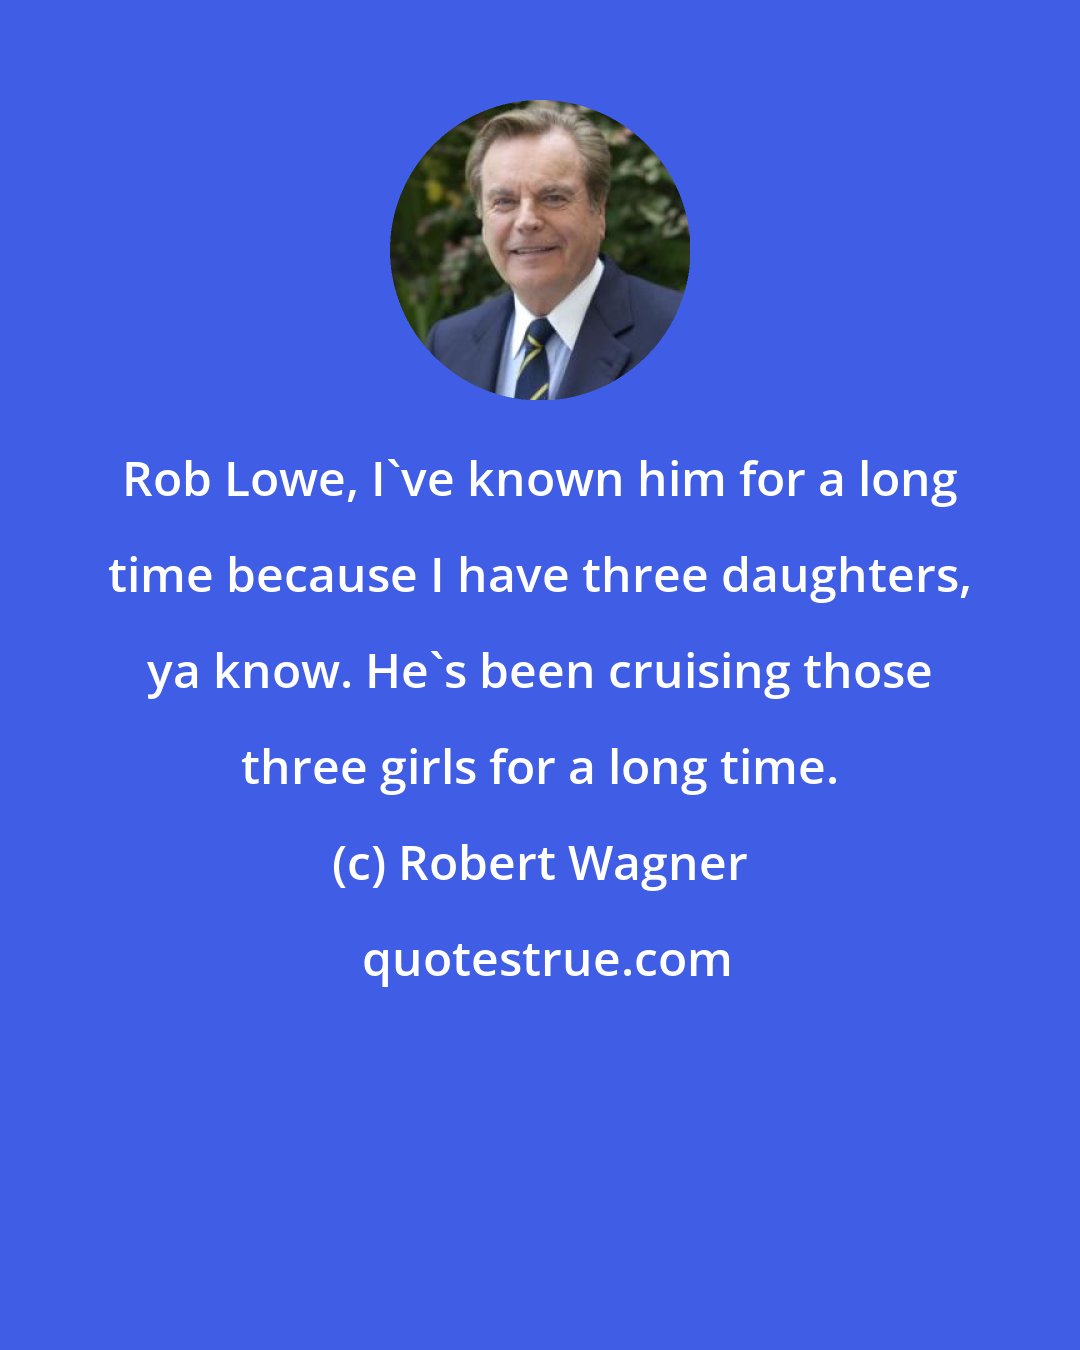 Robert Wagner: Rob Lowe, I've known him for a long time because I have three daughters, ya know. He's been cruising those three girls for a long time.